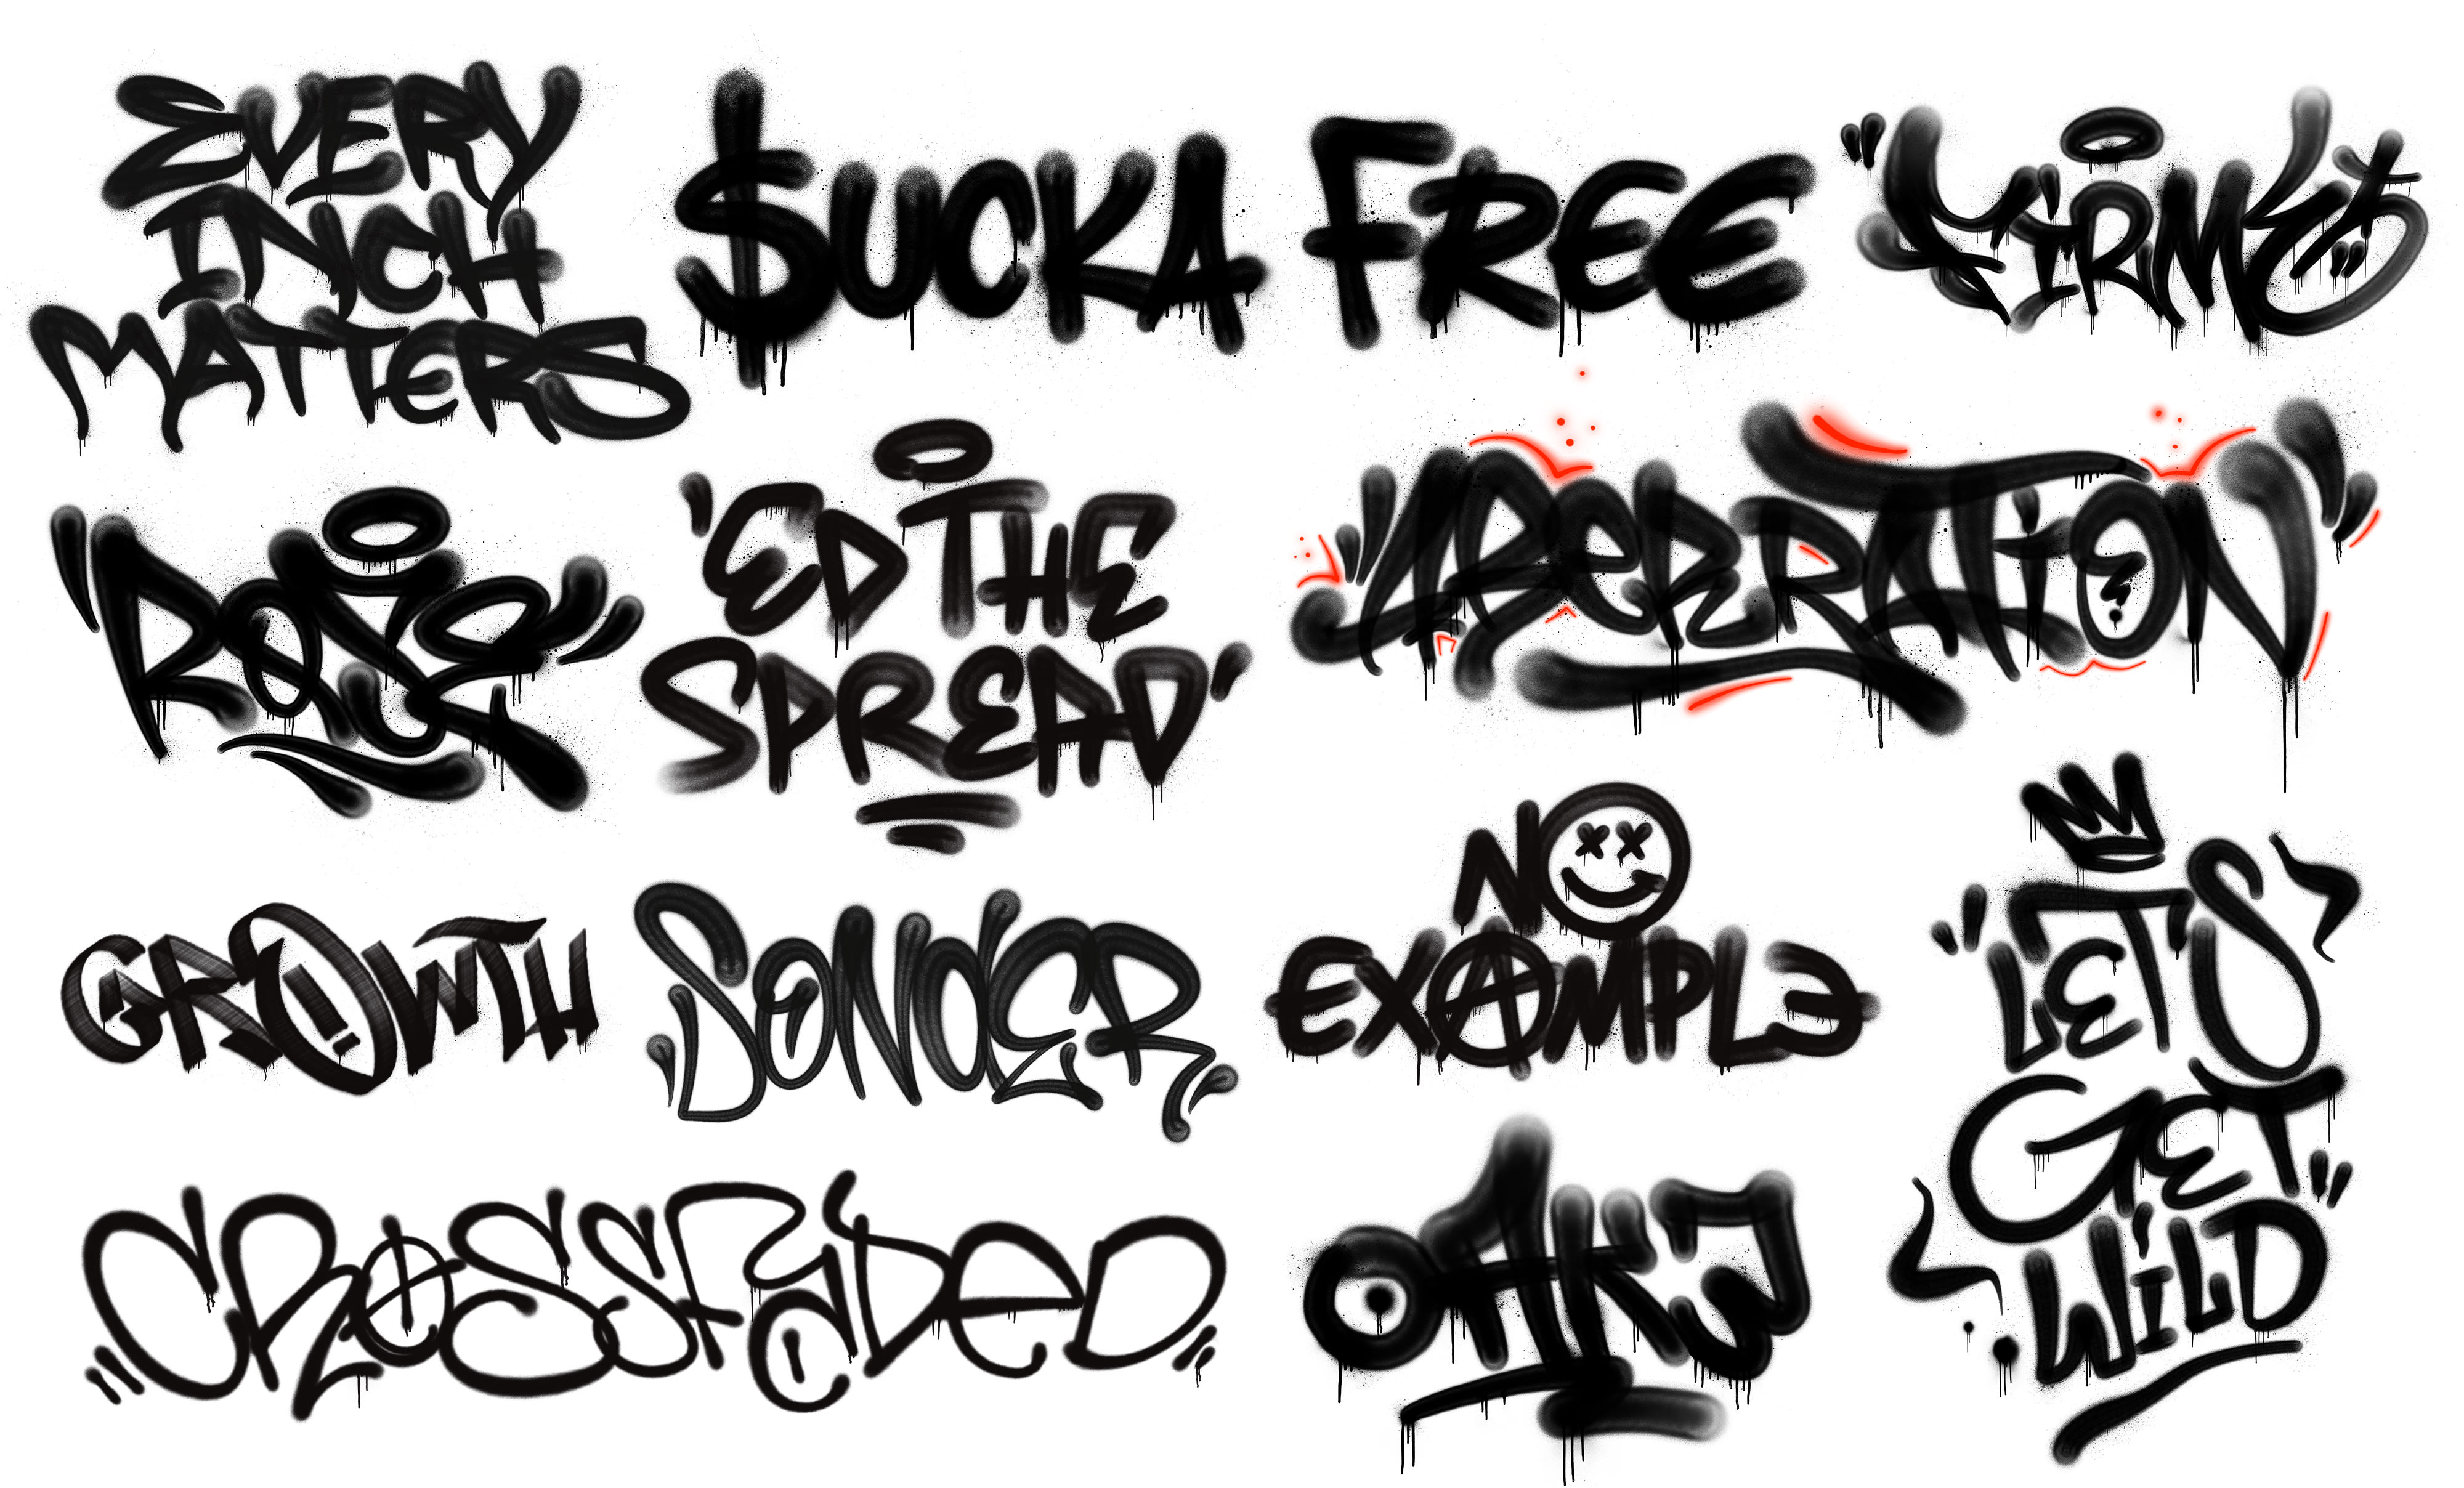 create graffiti tag for you or logo for your brand